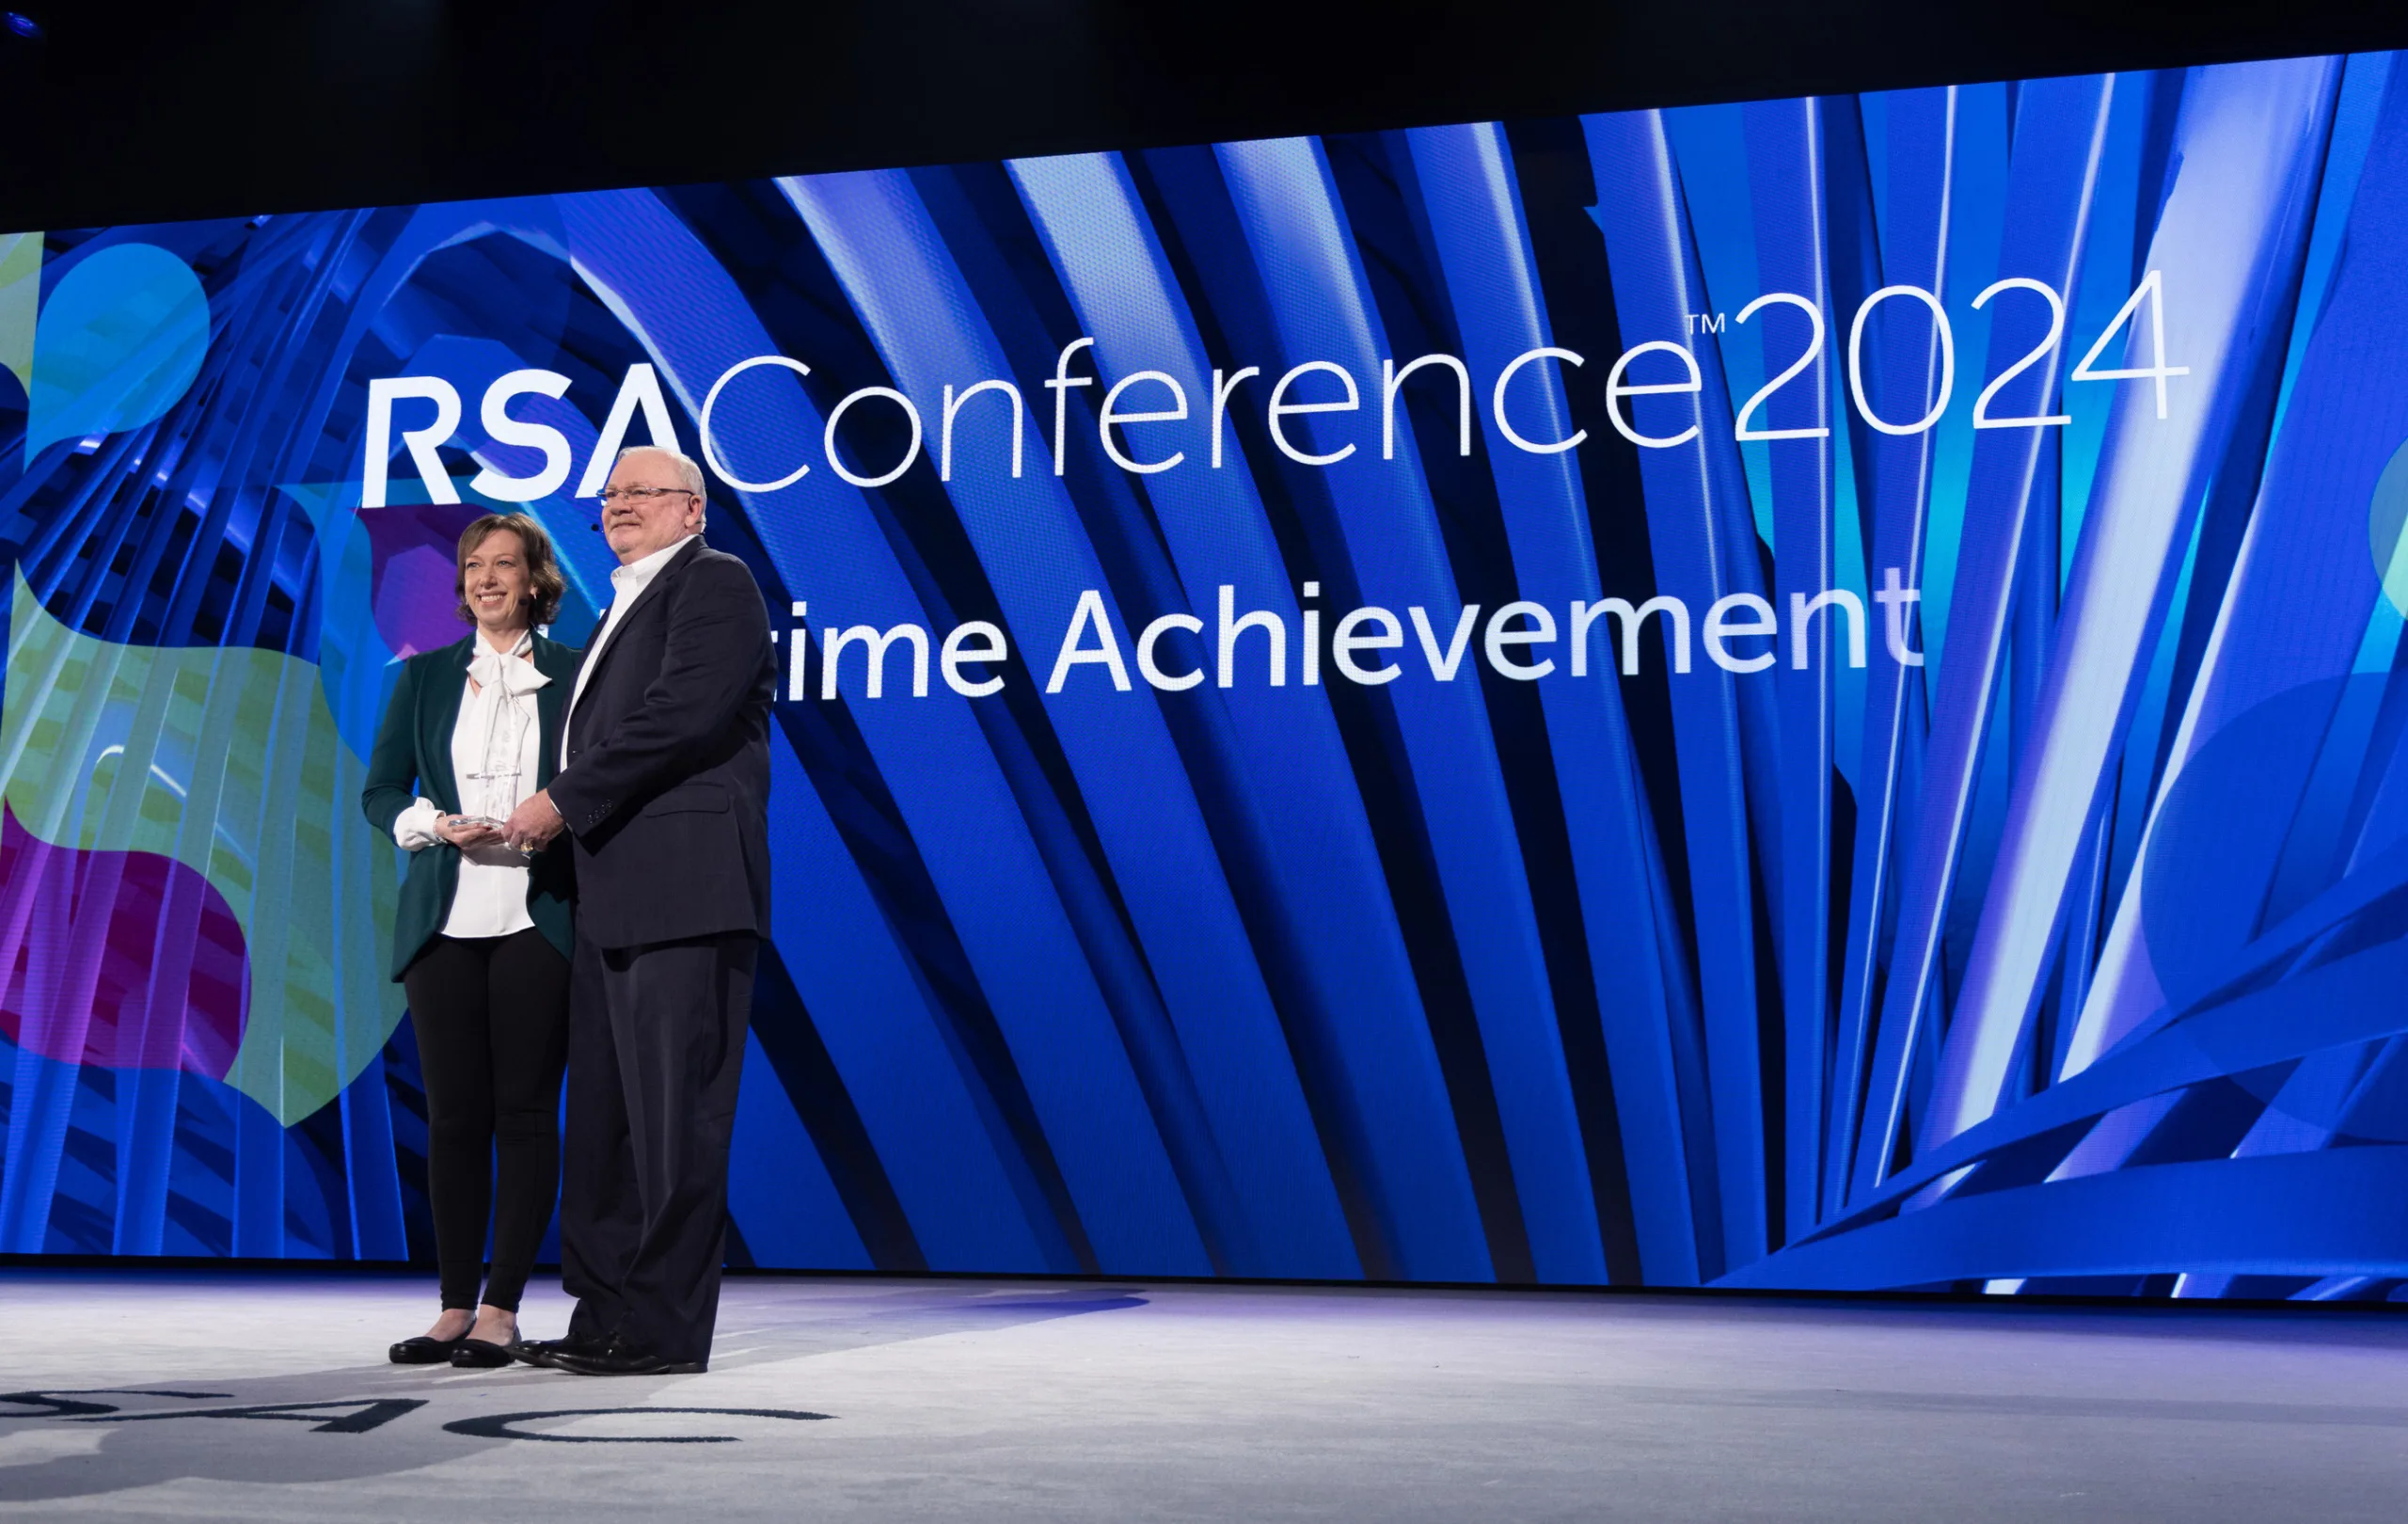 Rsa Conference Honours Michael Brown, Craig Gentry, Oded Regev For Lifetime Achievement, Excellence In Mathematics